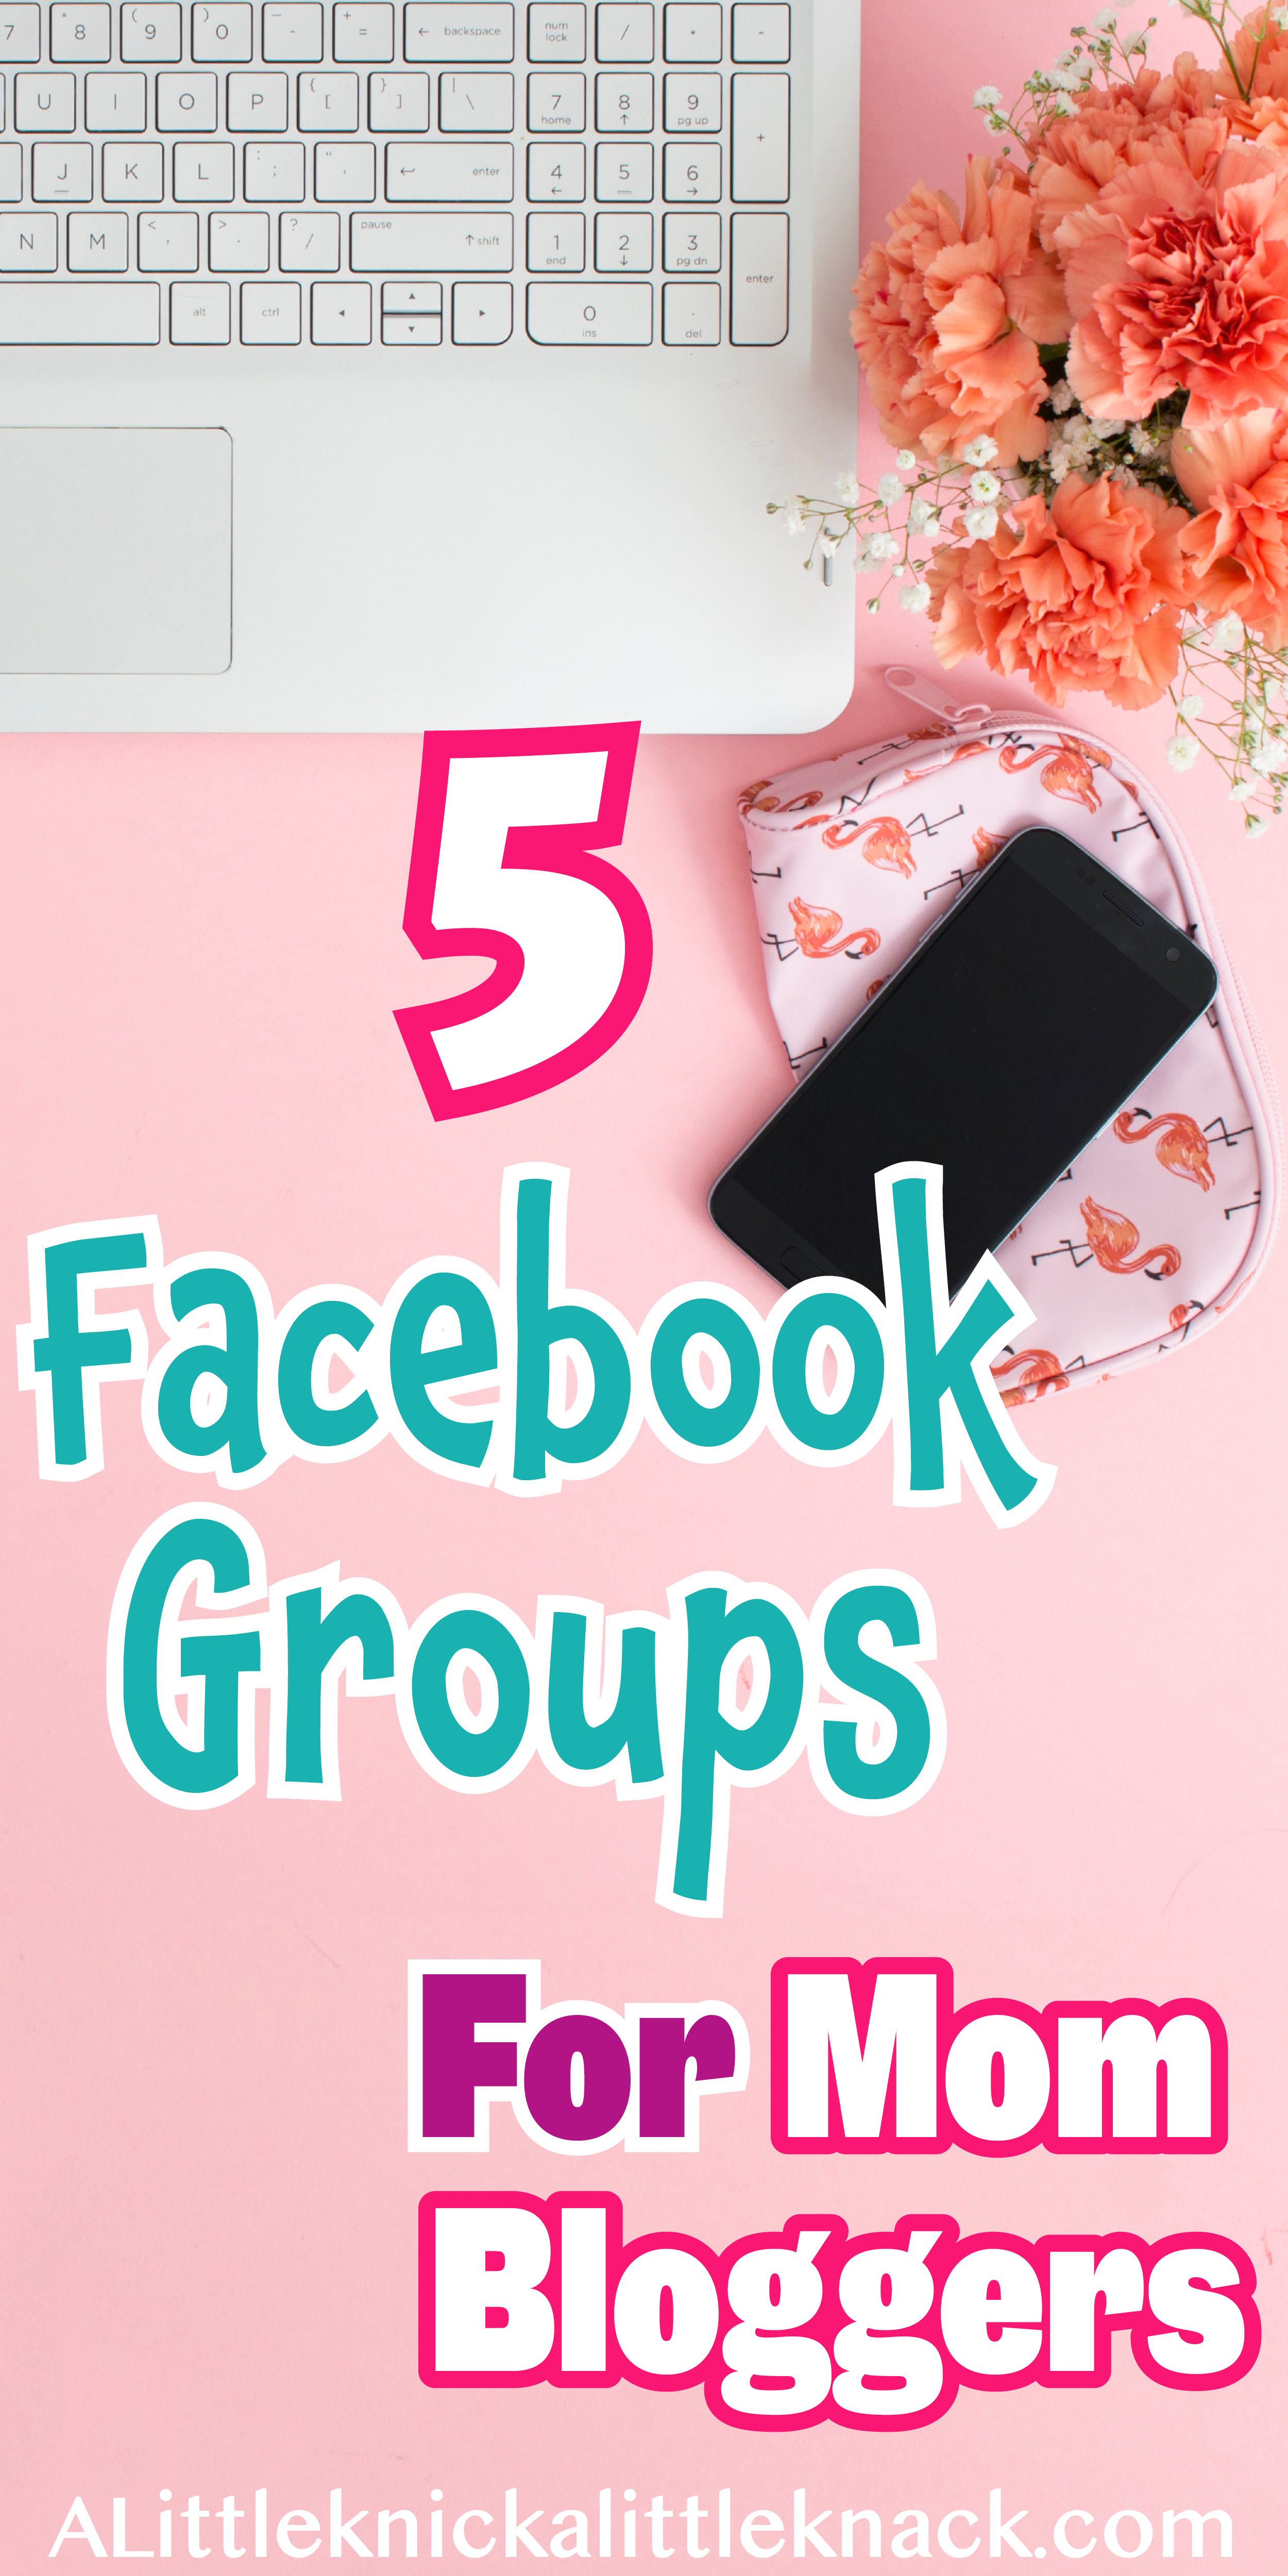 The best blogging advice is a few clicks away with these 5 amazing blogging groups! #blog